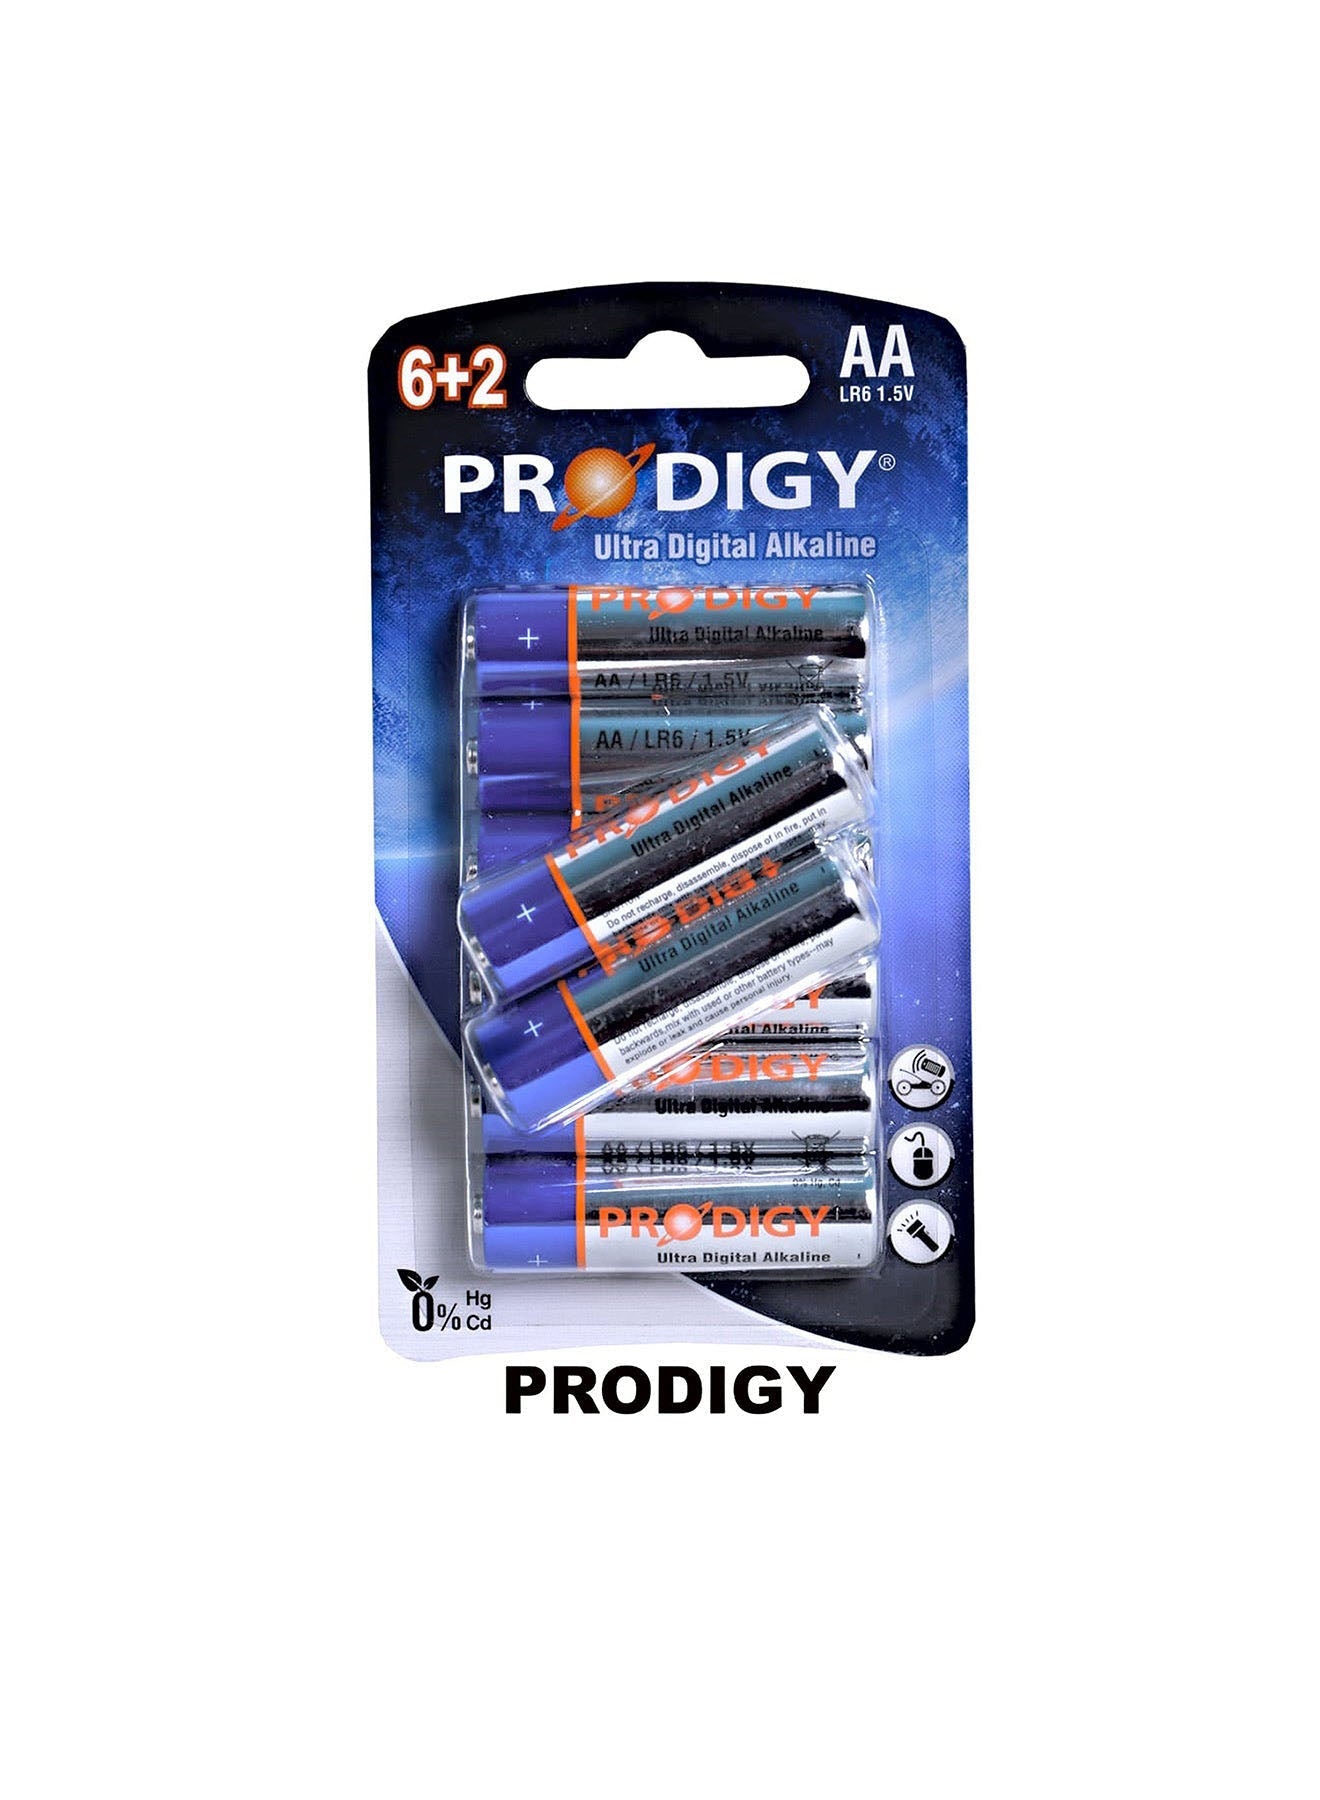 Prodigy Alkaline LR6UD 62B AA8 Value Pack of 3 